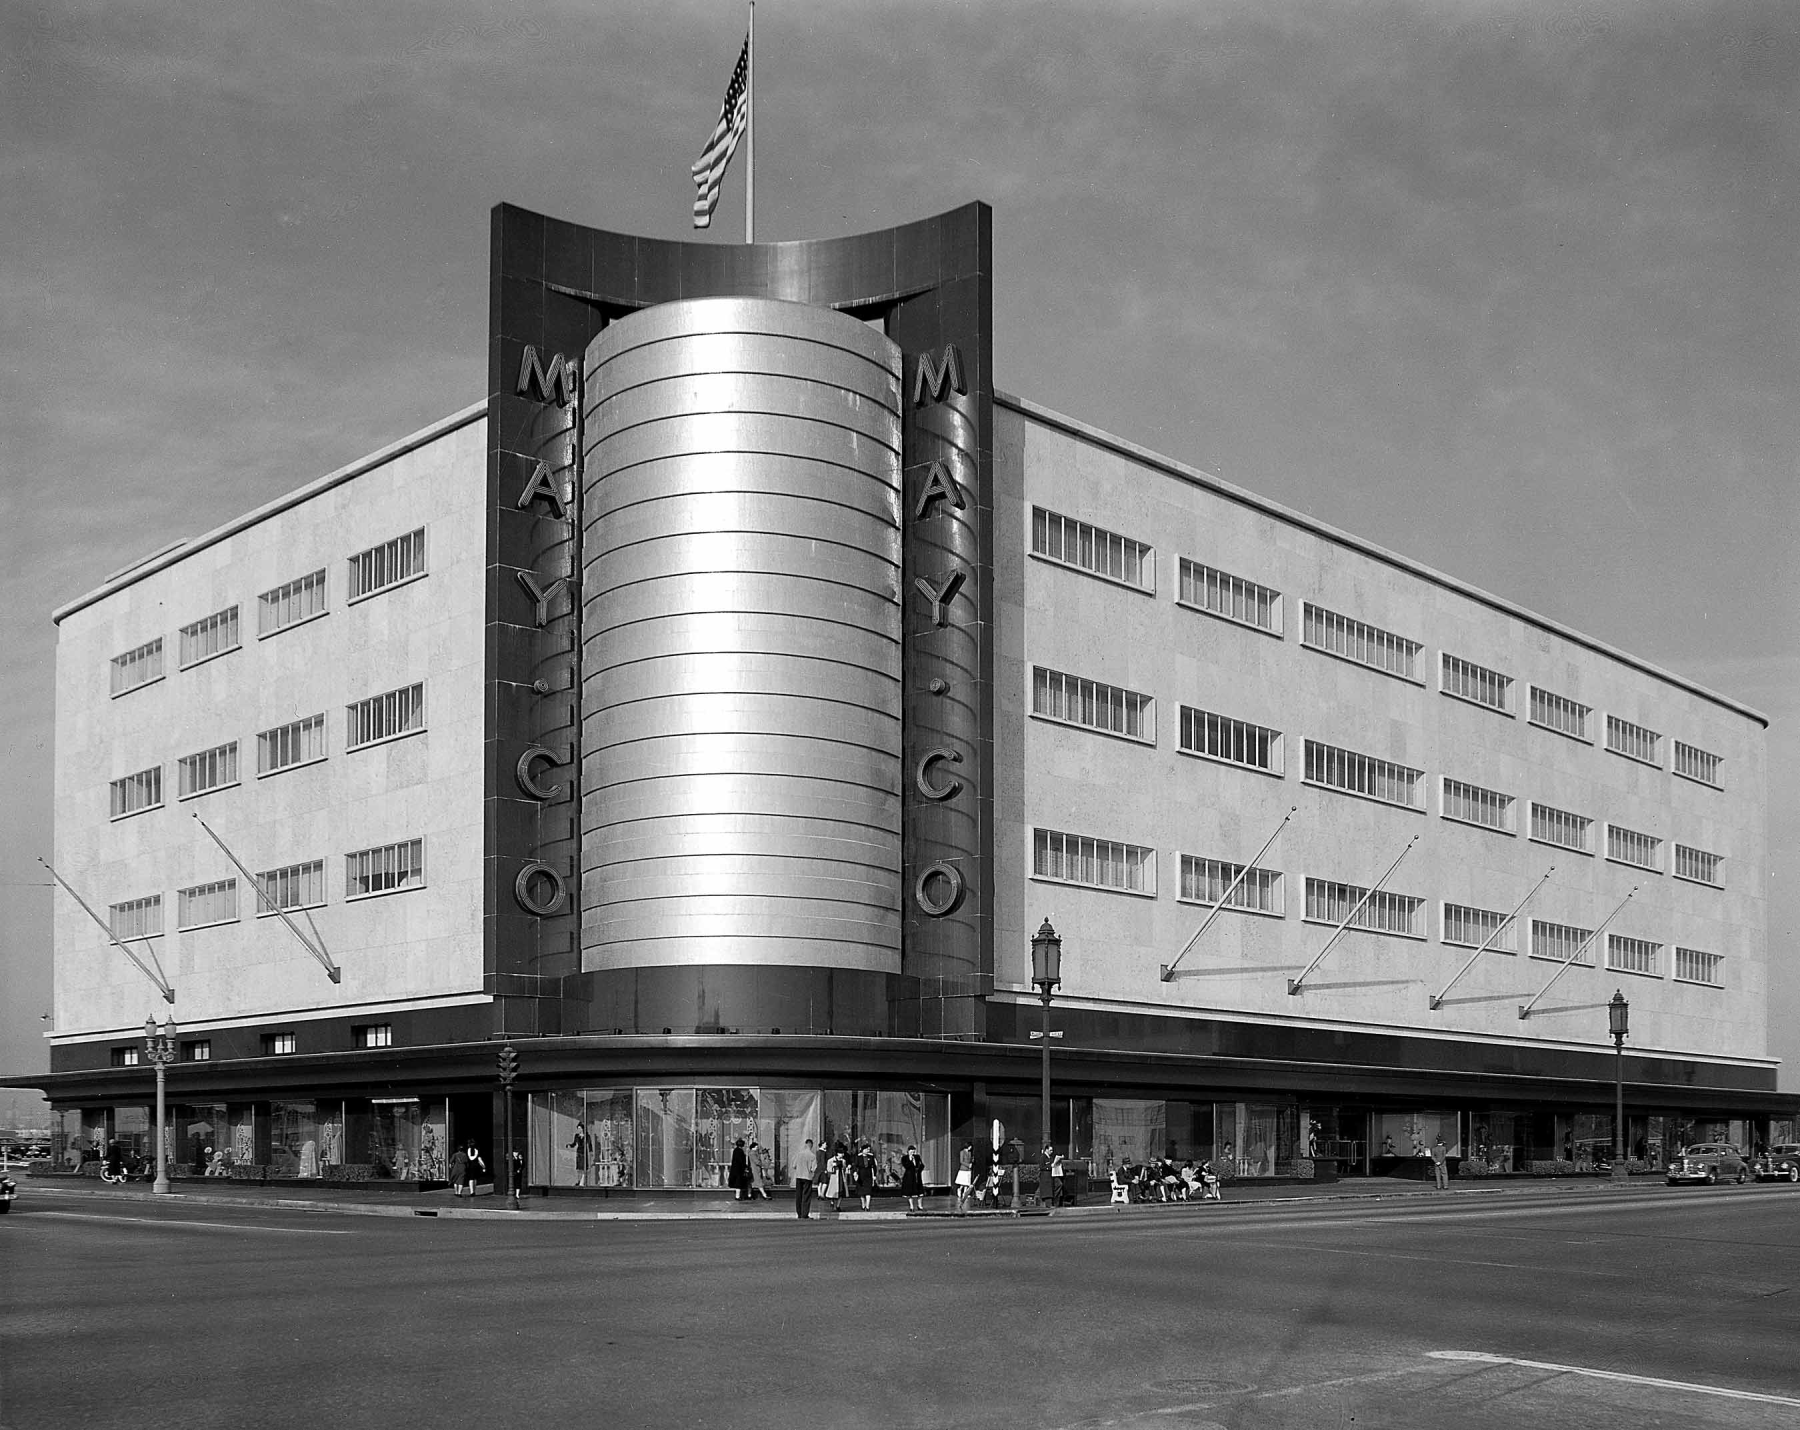 Exterior, May Company department store, 6067 Wilshire Blvd., Los Angeles, California, 1942. Courtesy of the Bison Archives photographs at the Margaret Herrick Library